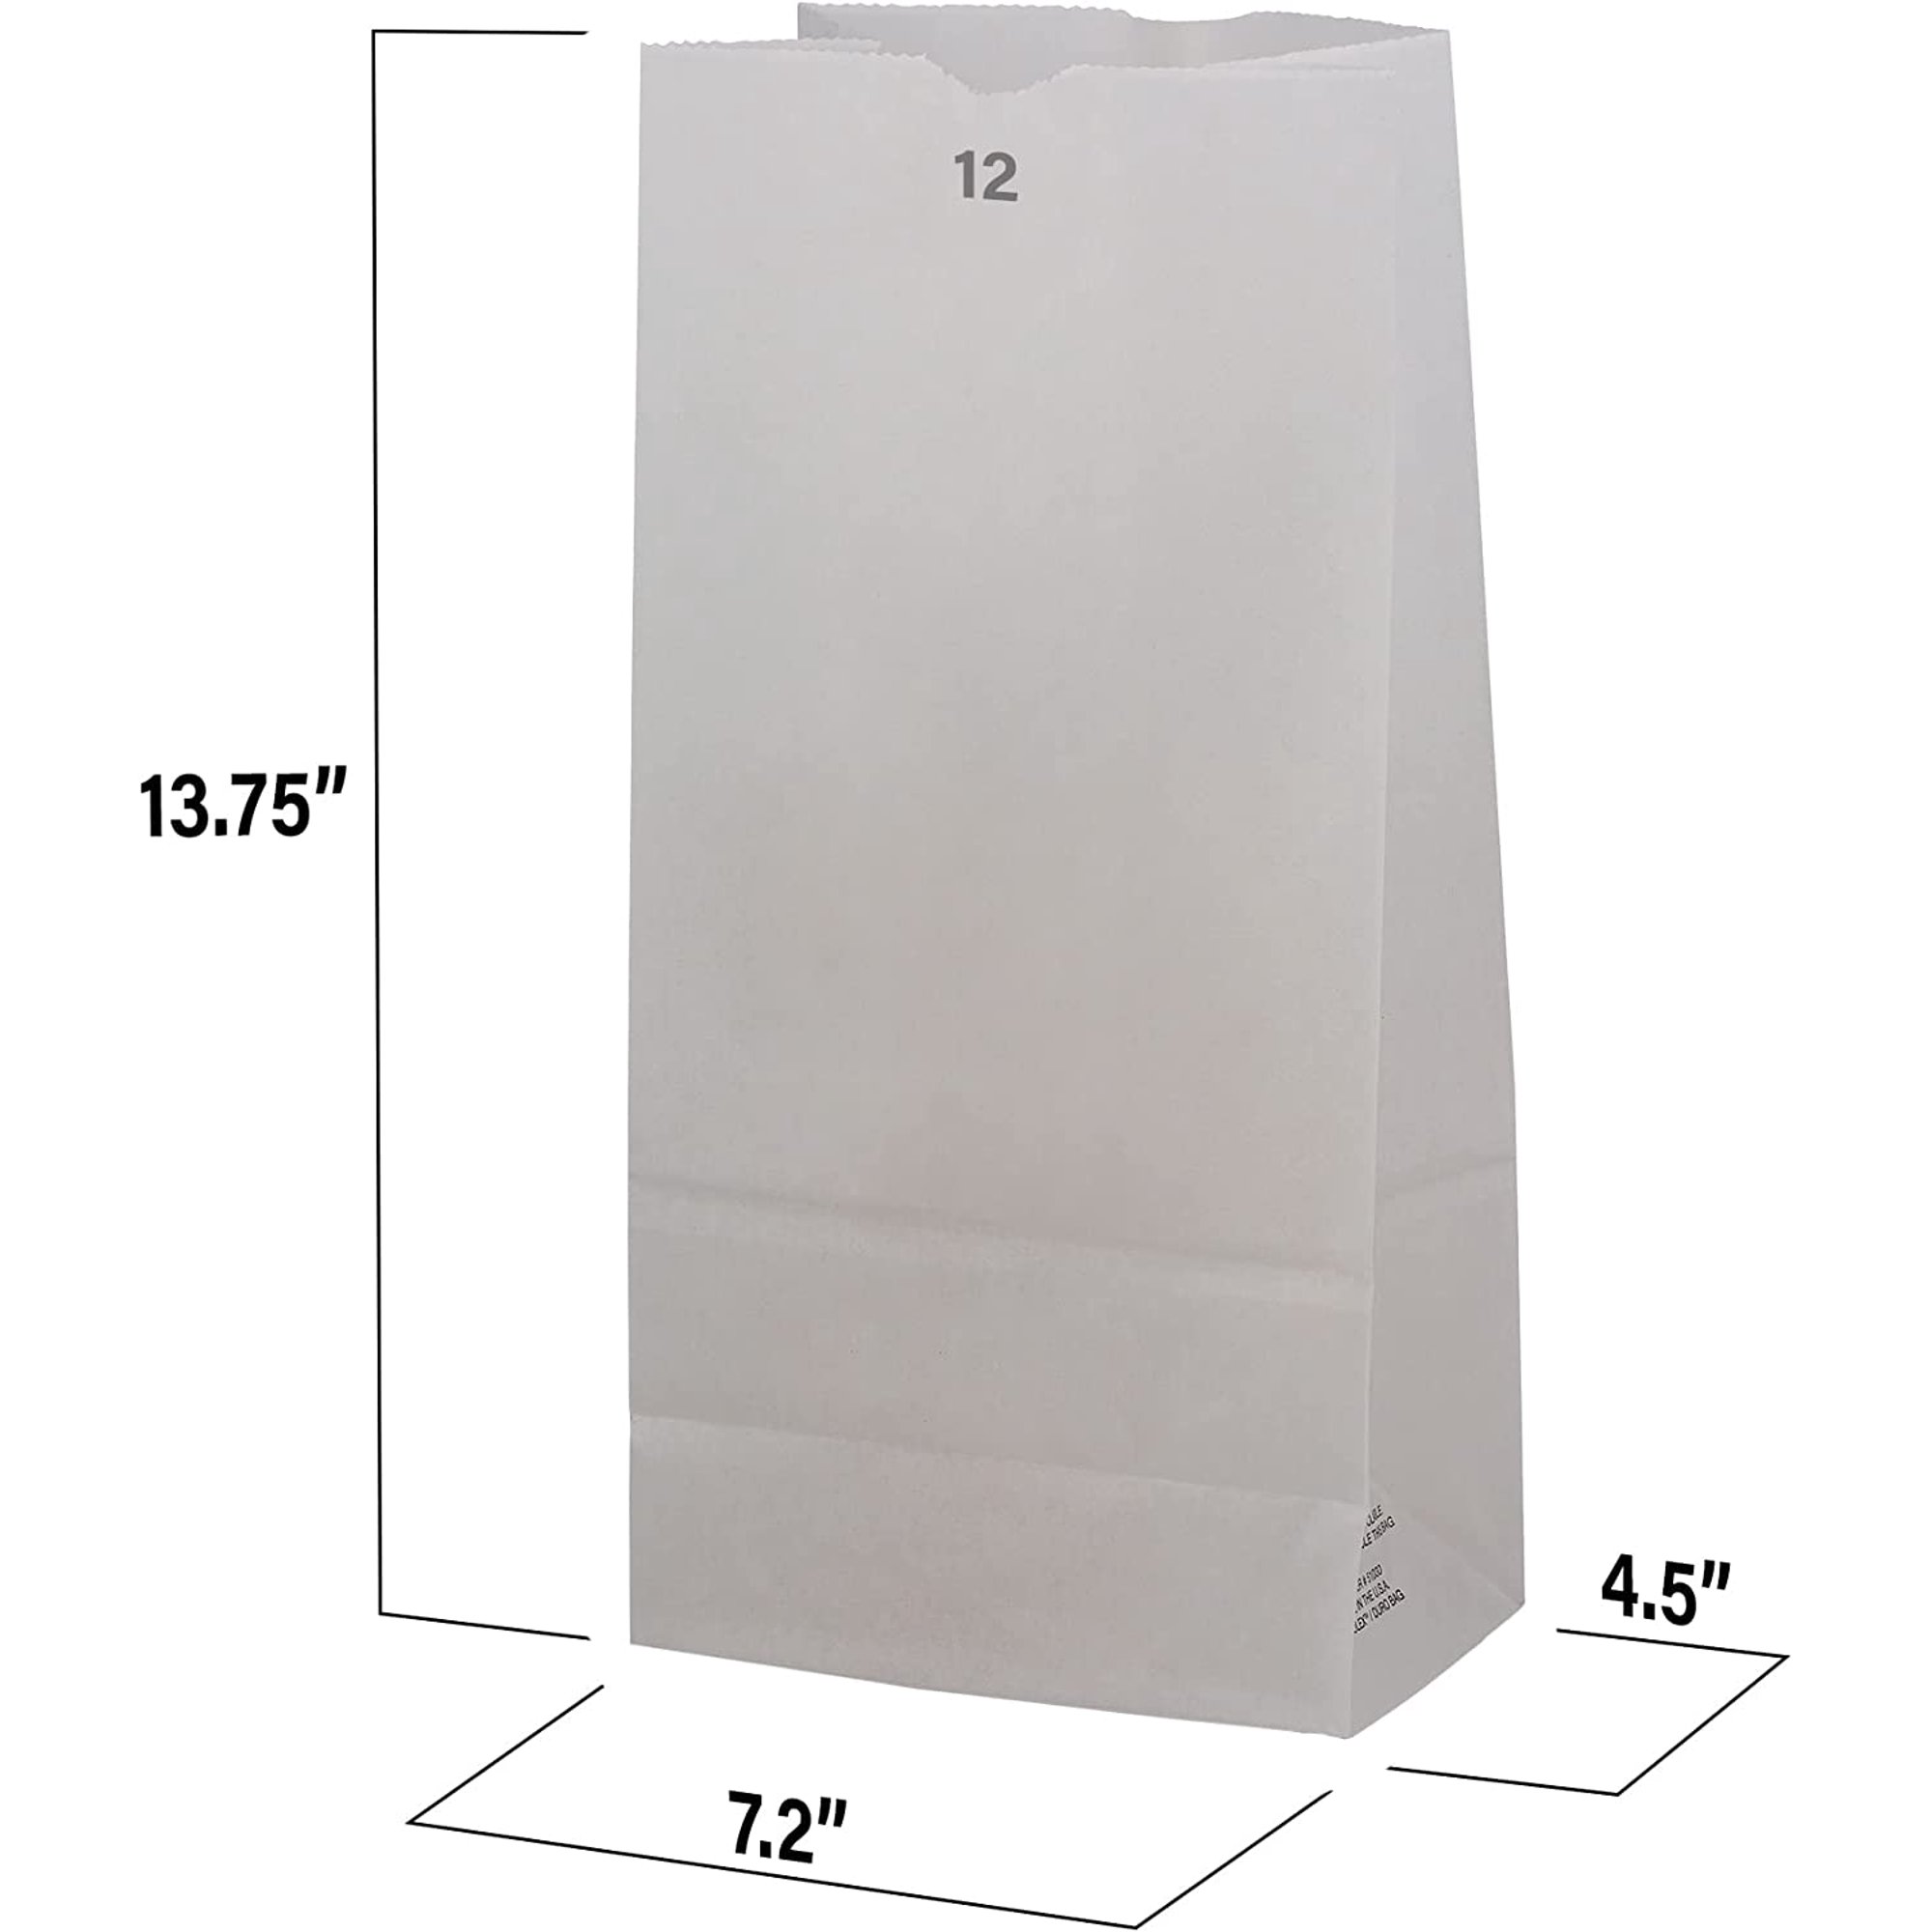 MT Products 12lb Strong and Durable White Paper Bag - 50 Pieces